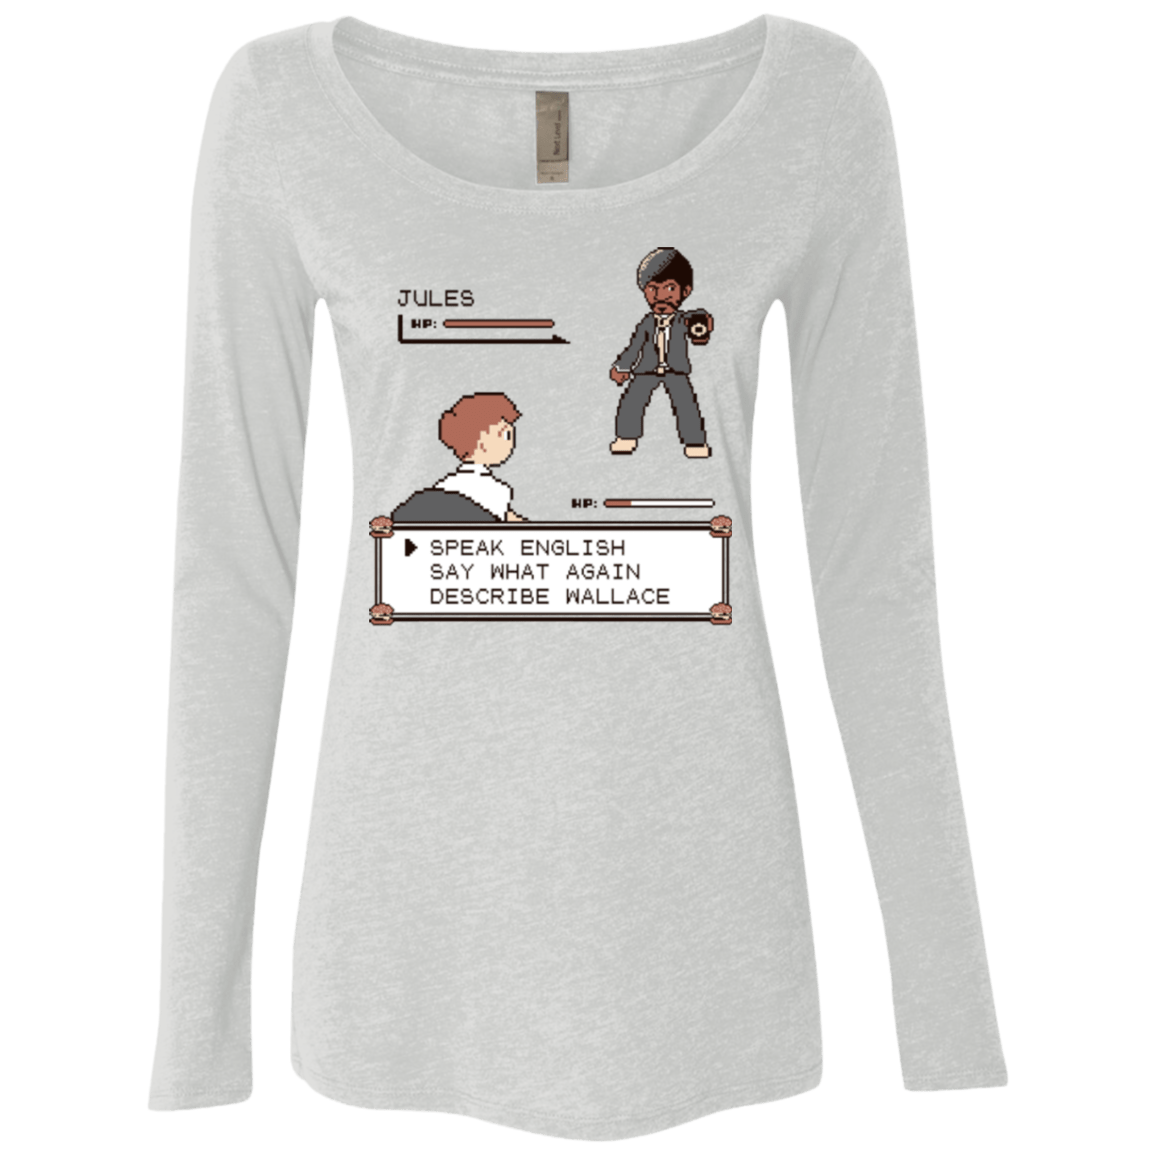 T-Shirts Heather White / Small say what again Women's Triblend Long Sleeve Shirt